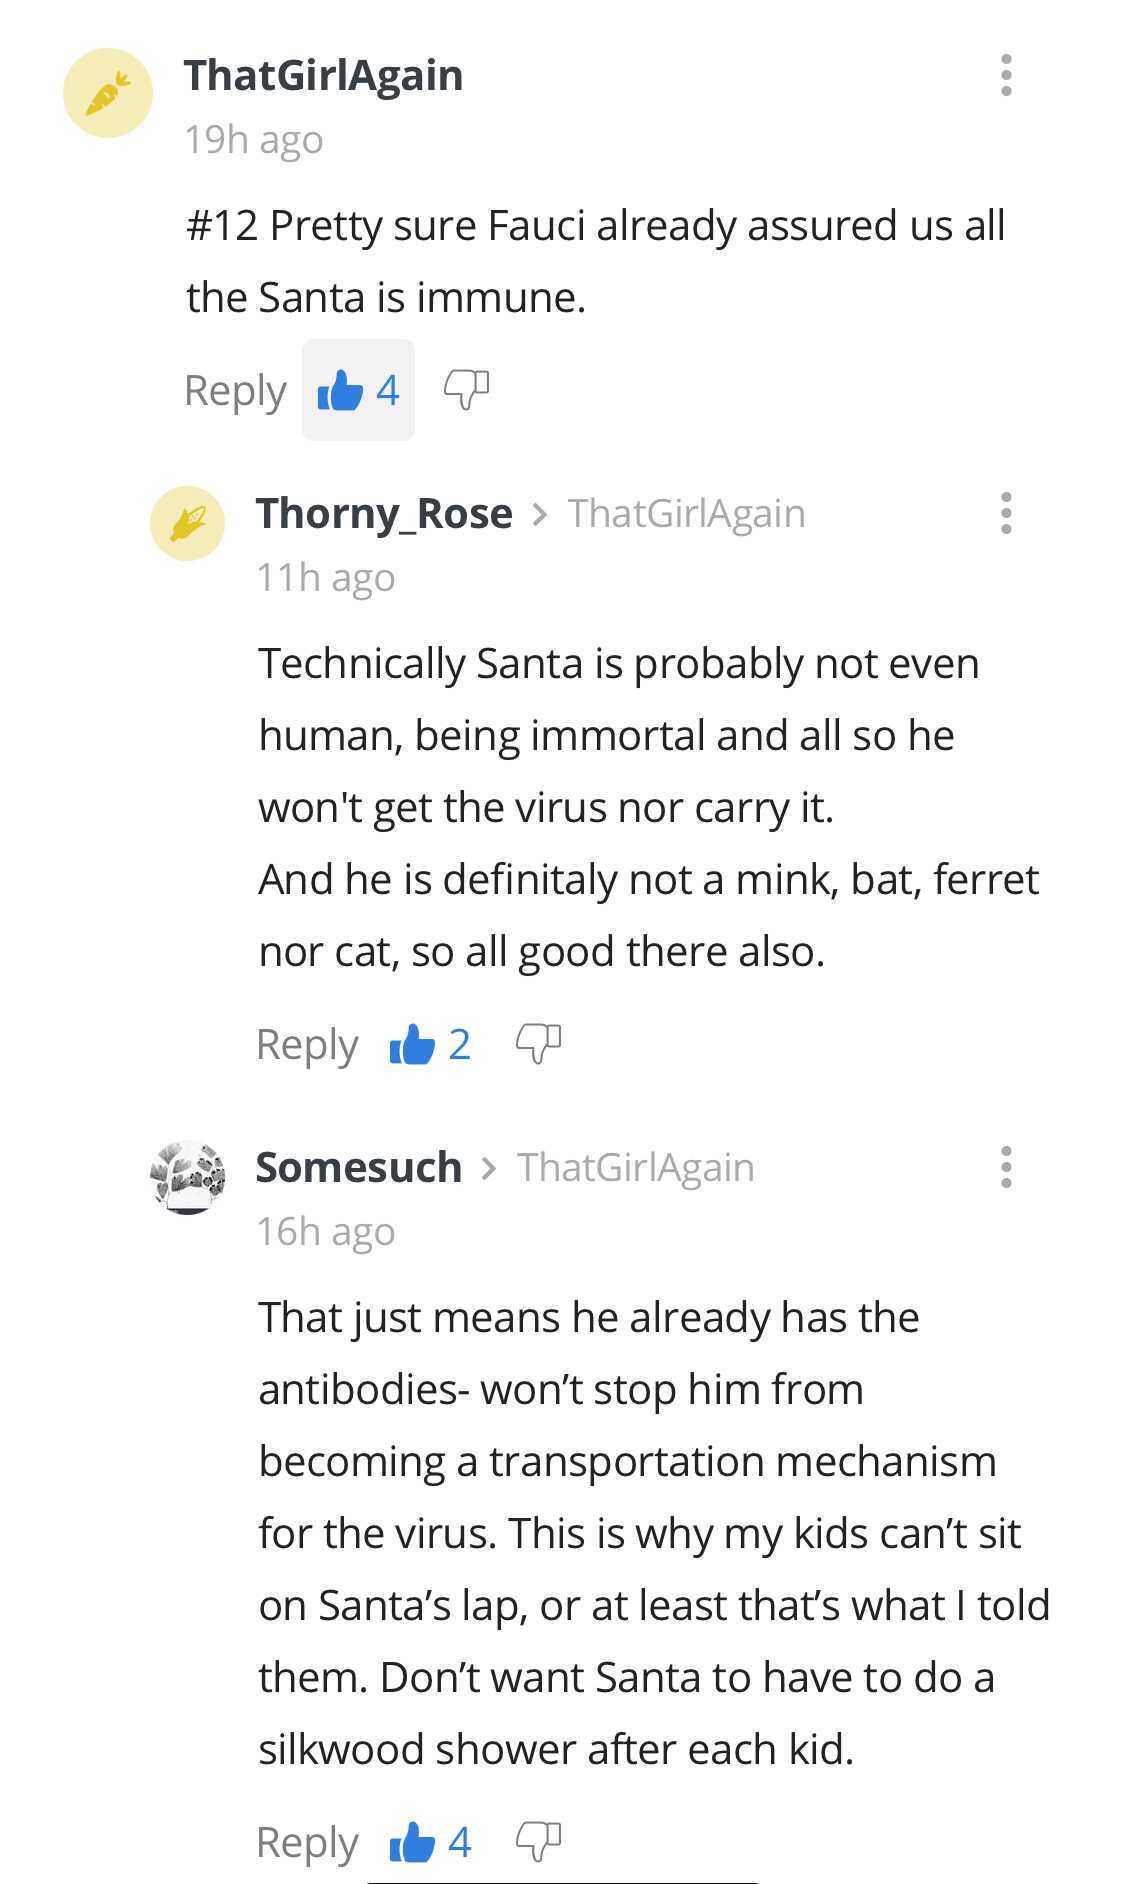 document - ThatGirlAgain 19h ago Pretty sure Fauci already assured us all the Santa is immune. 64 Thorny_Rose > ThatGirlAgain 11h ago Technically Santa is probably not even human, being immortal and all so he won't get the virus nor carry it. And he is de